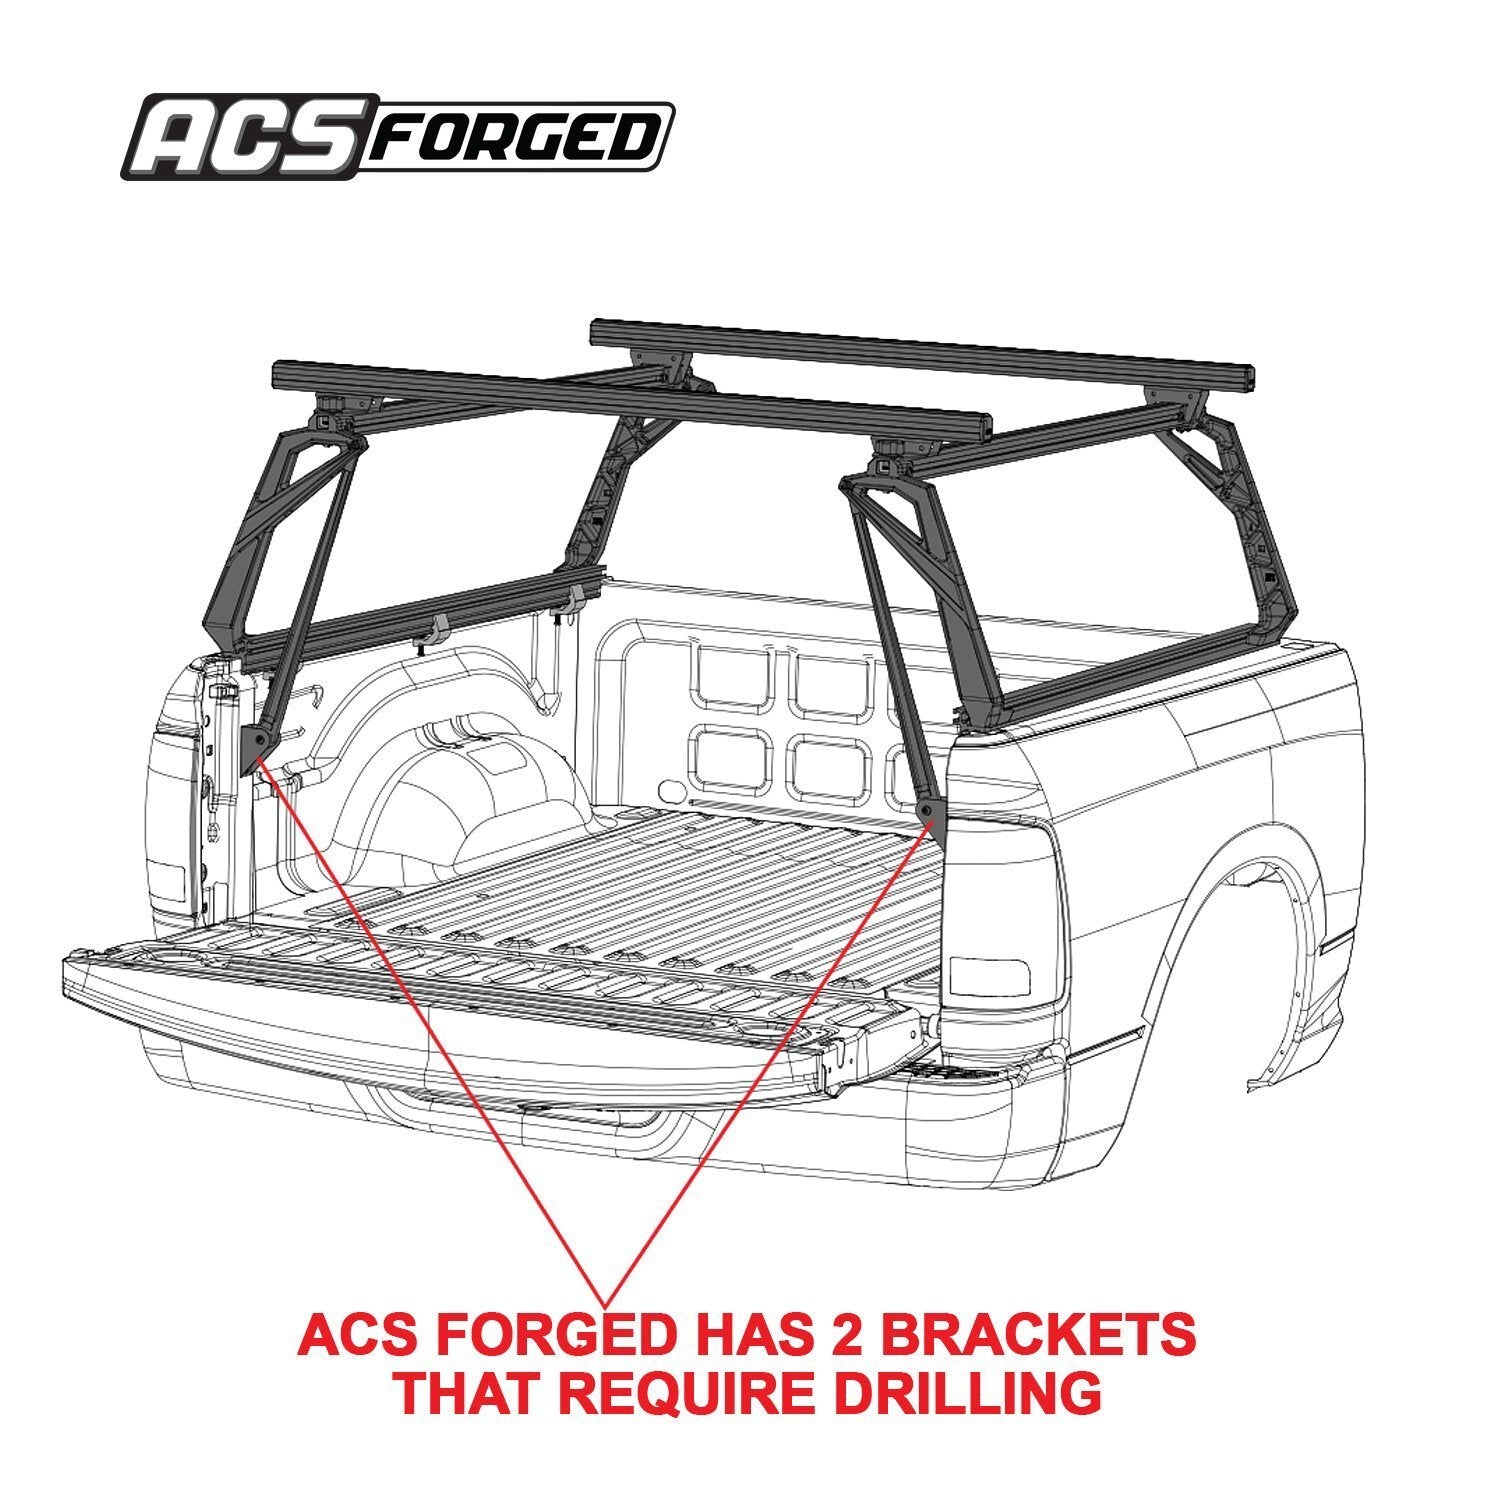 '04-23 Ford F250/350-ACS Forged Bed Accessories Leitner Designs design